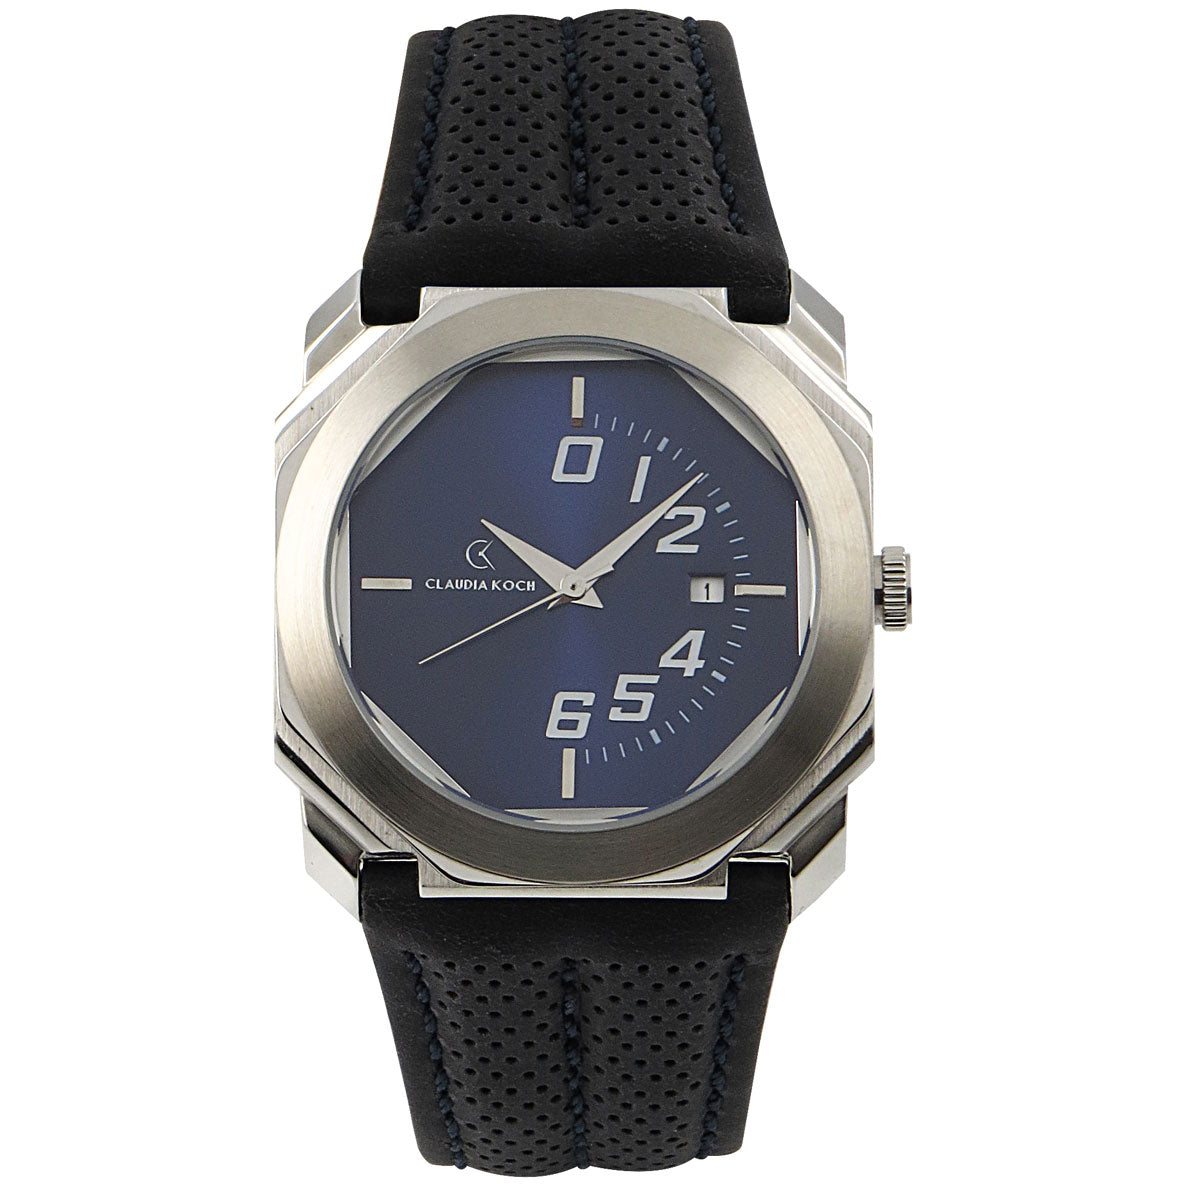 Rubber Band Stainless Date Analog Classy Men Watch